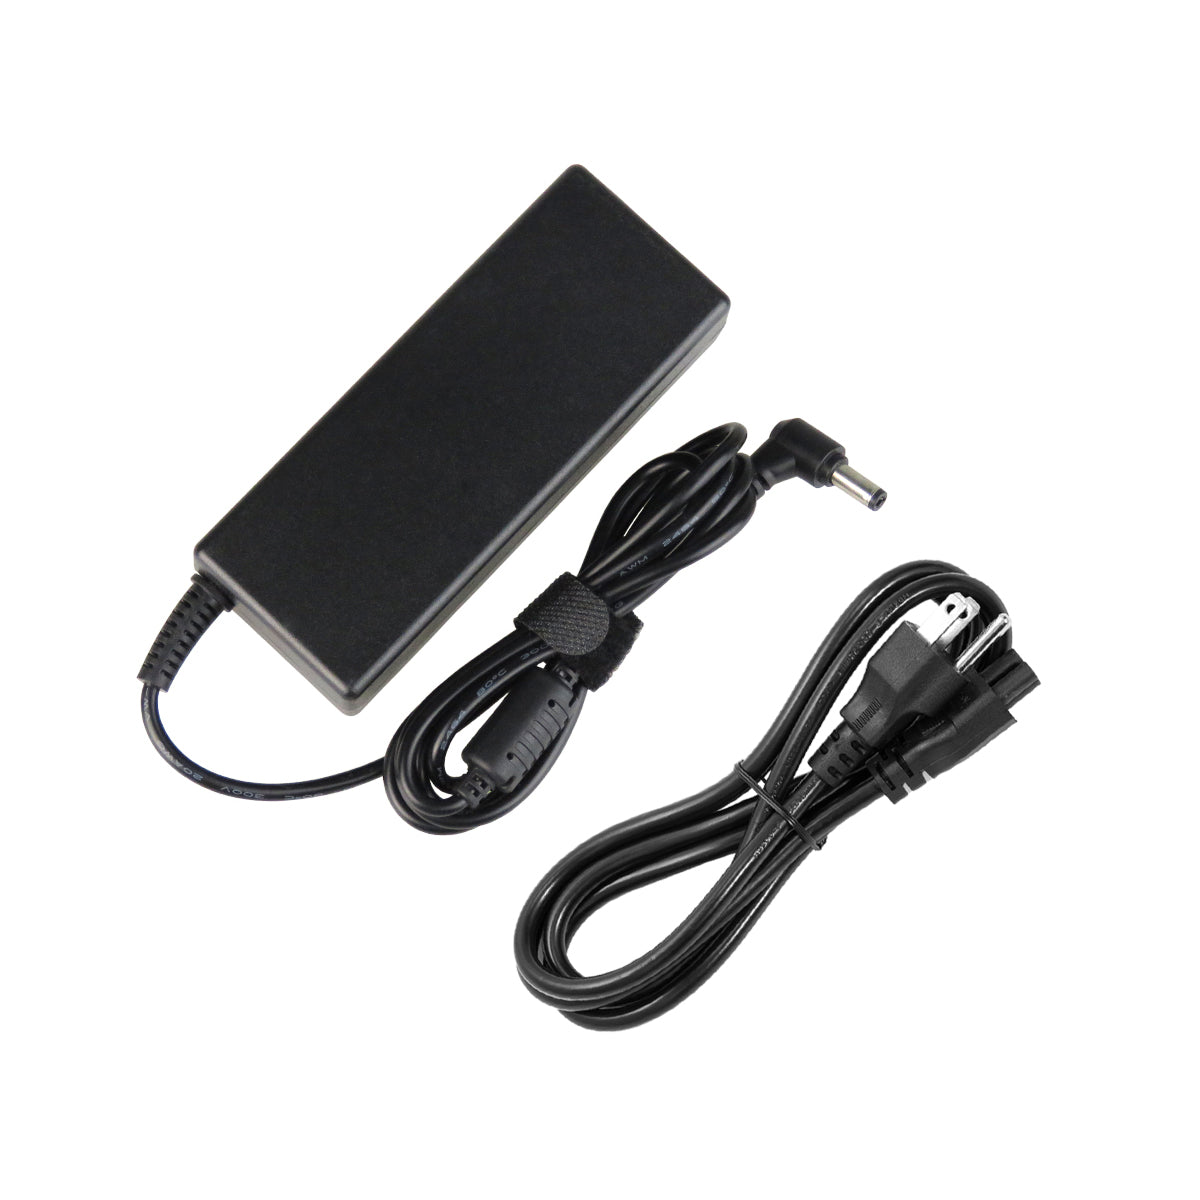 AC Adapter Charger for ASUS K55VS Laptop.